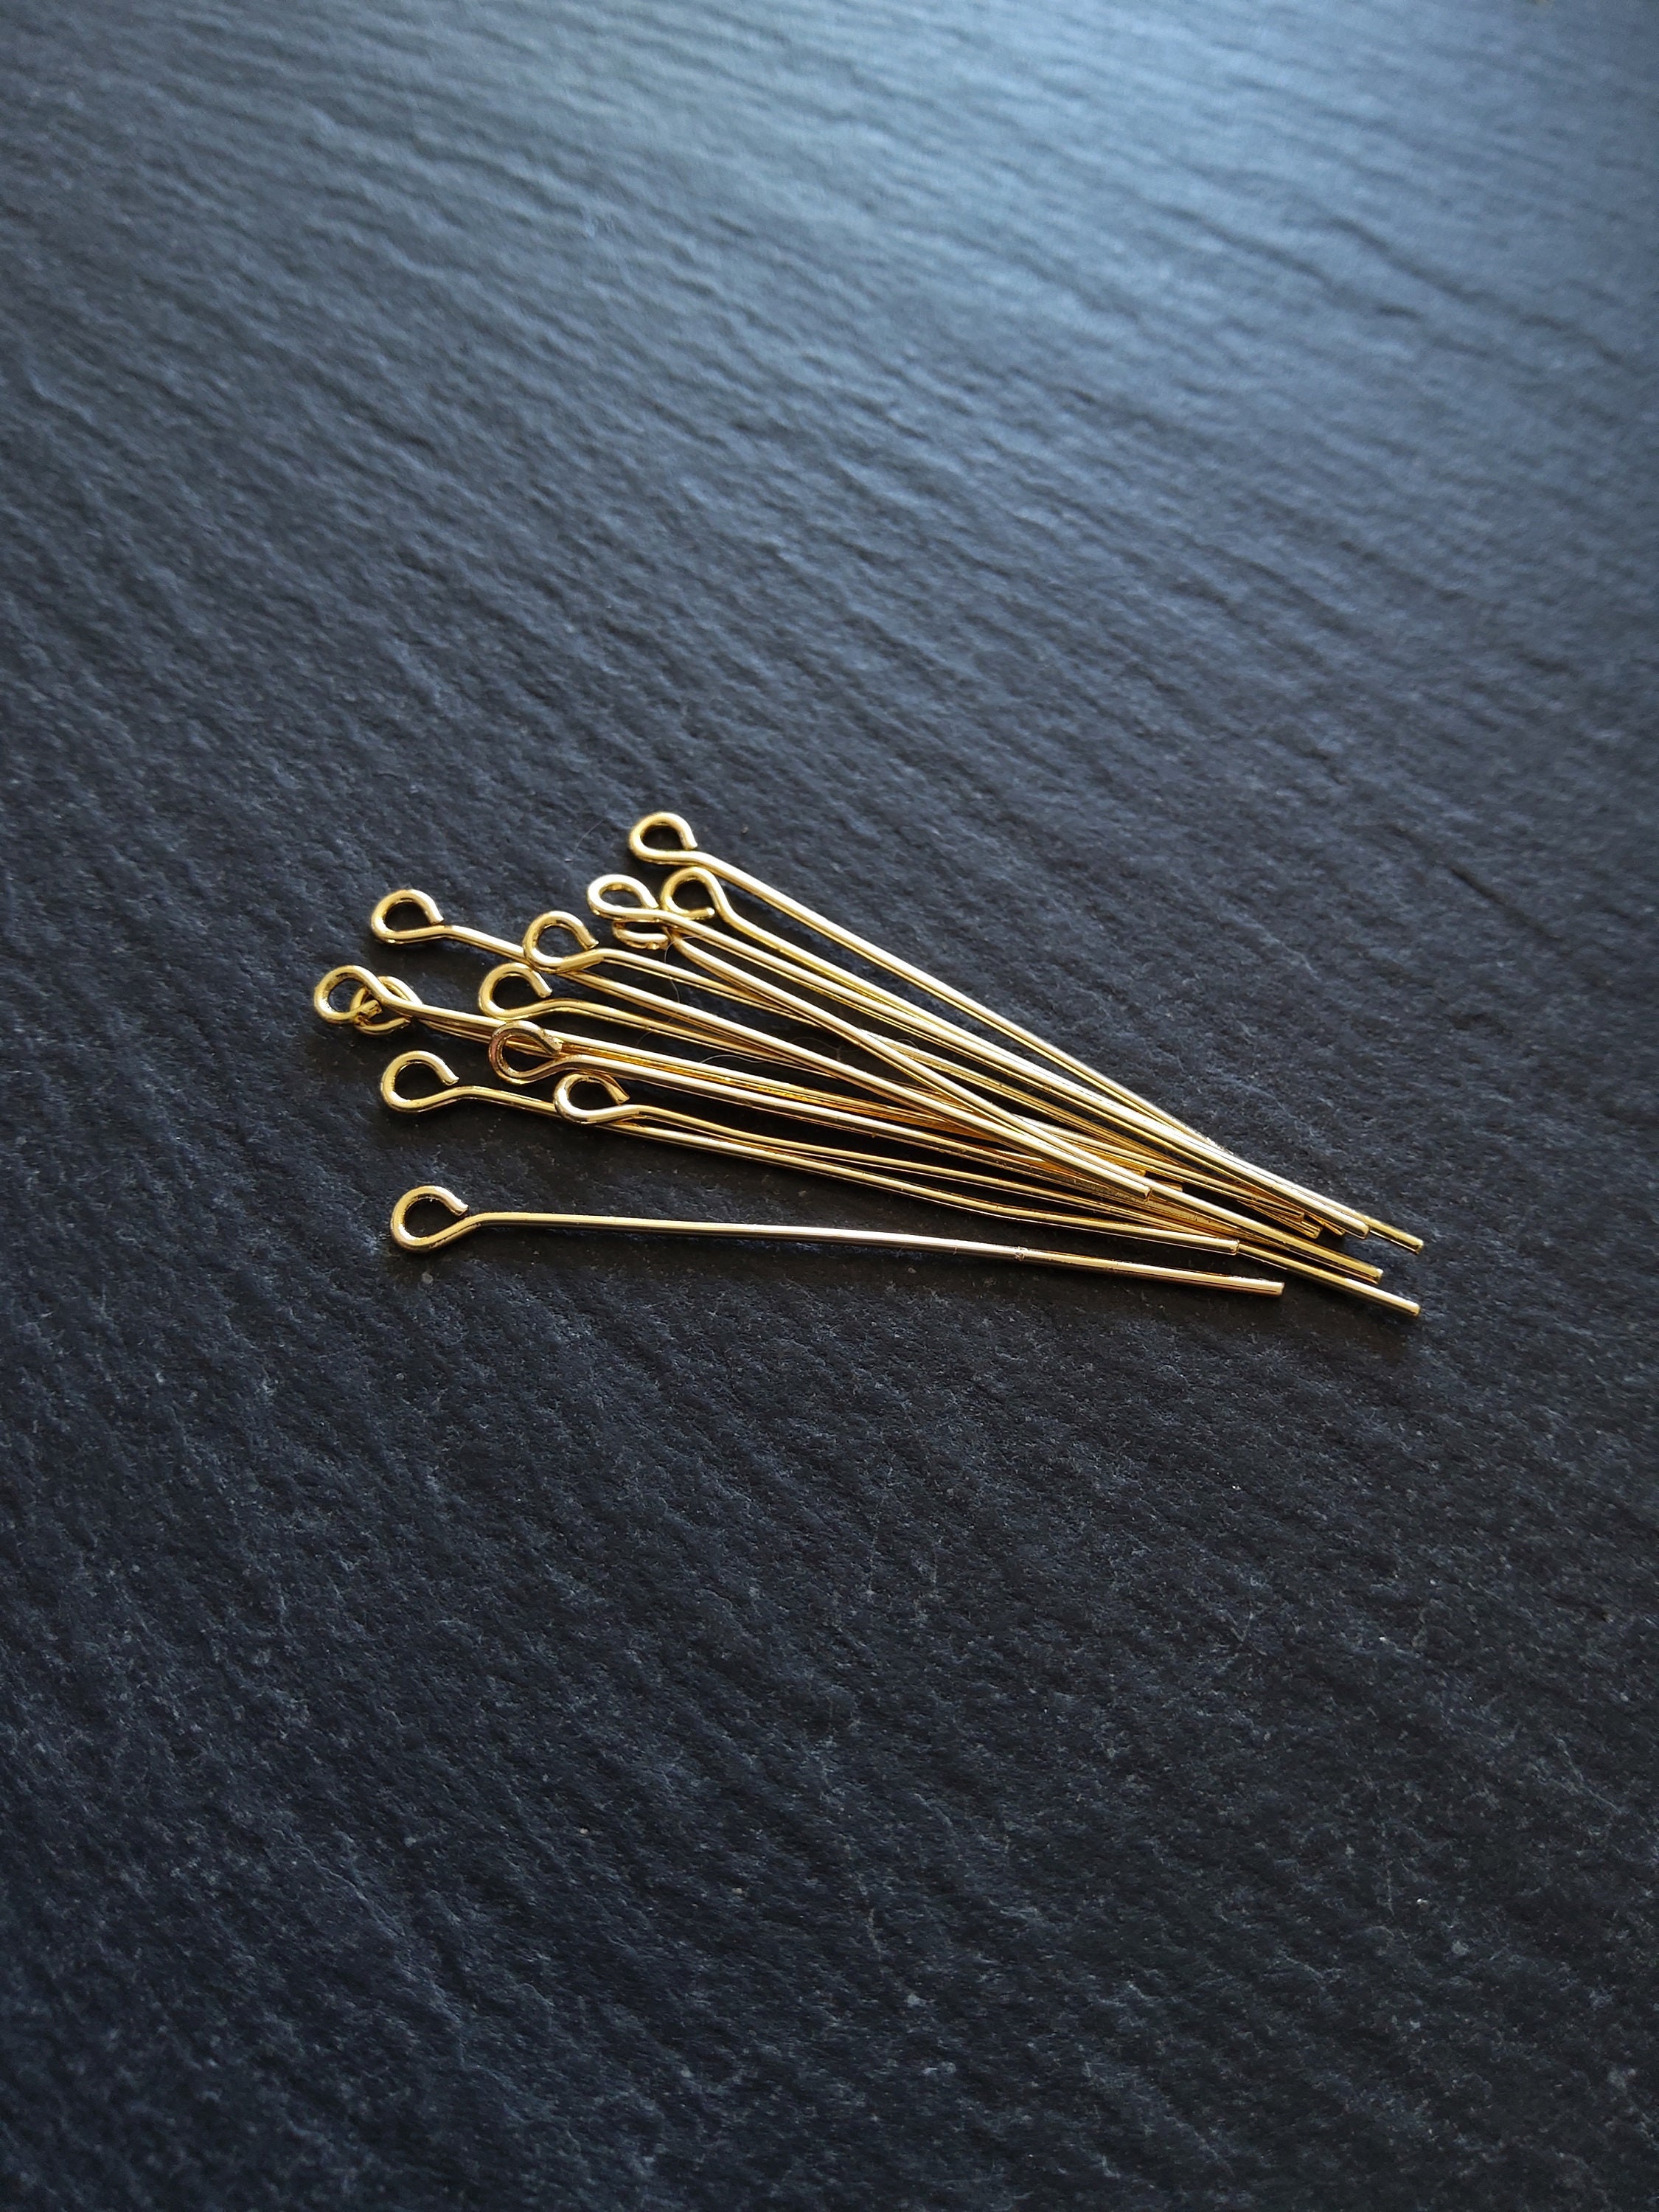 Gold Eye Pin Silver Rose Gold Black Open Eyepins Headpins 0.7mm (21 Gauge)  by 20mm, 30mm, 35mm Jewelry Making Craft Supply DIY Finding L-537 L-538  L-549